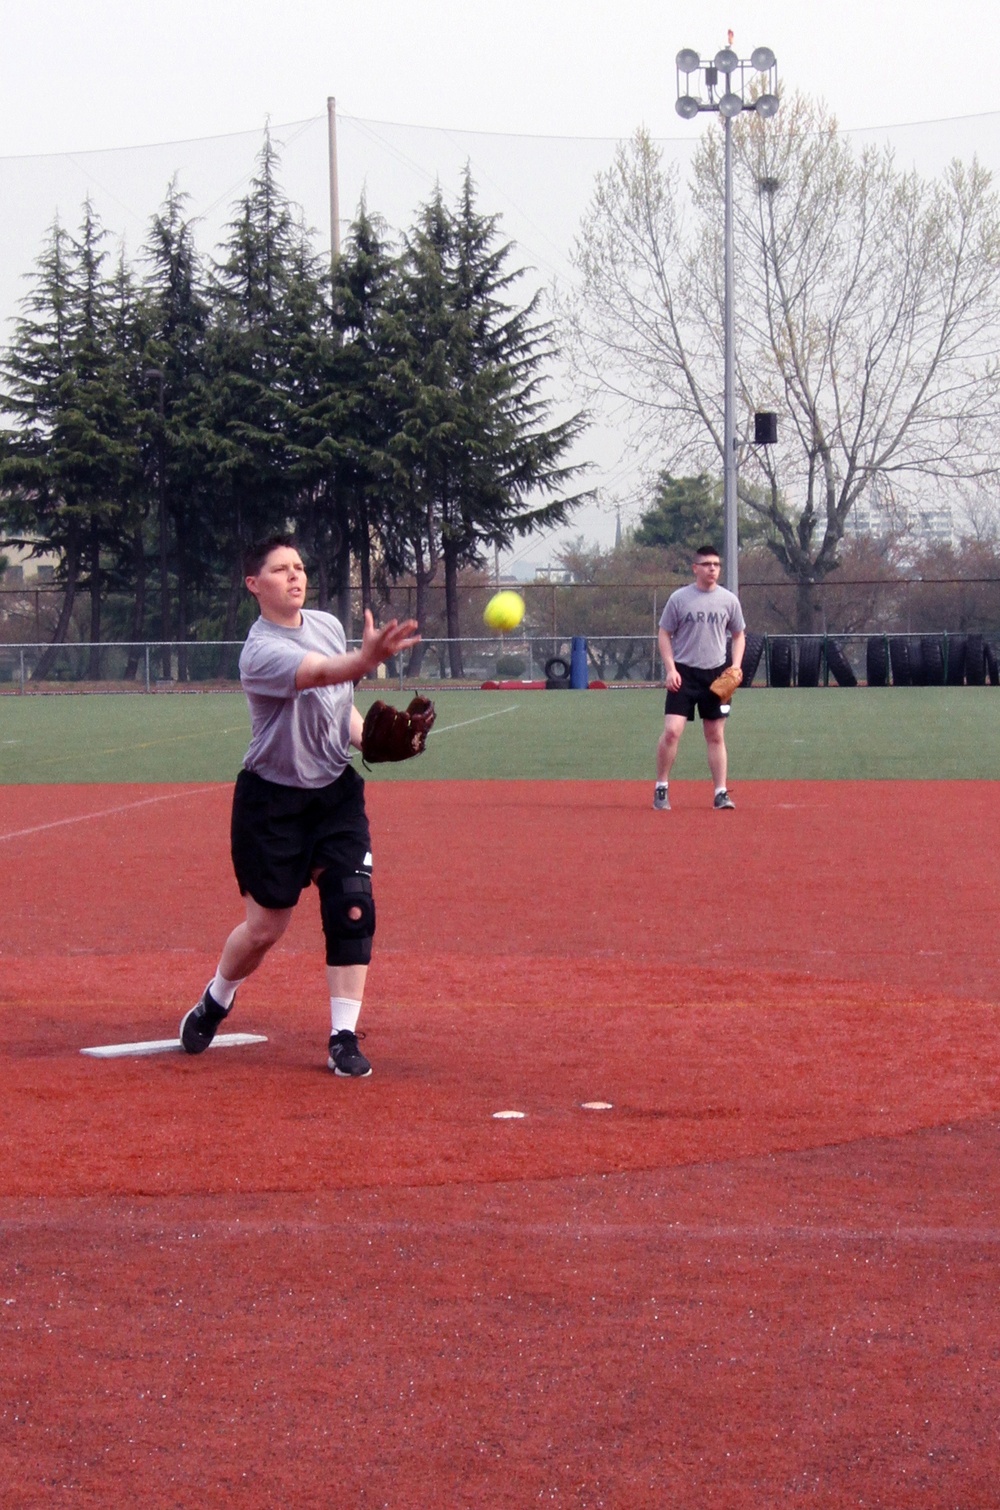 KATUSAs, Soldiers compete in softball